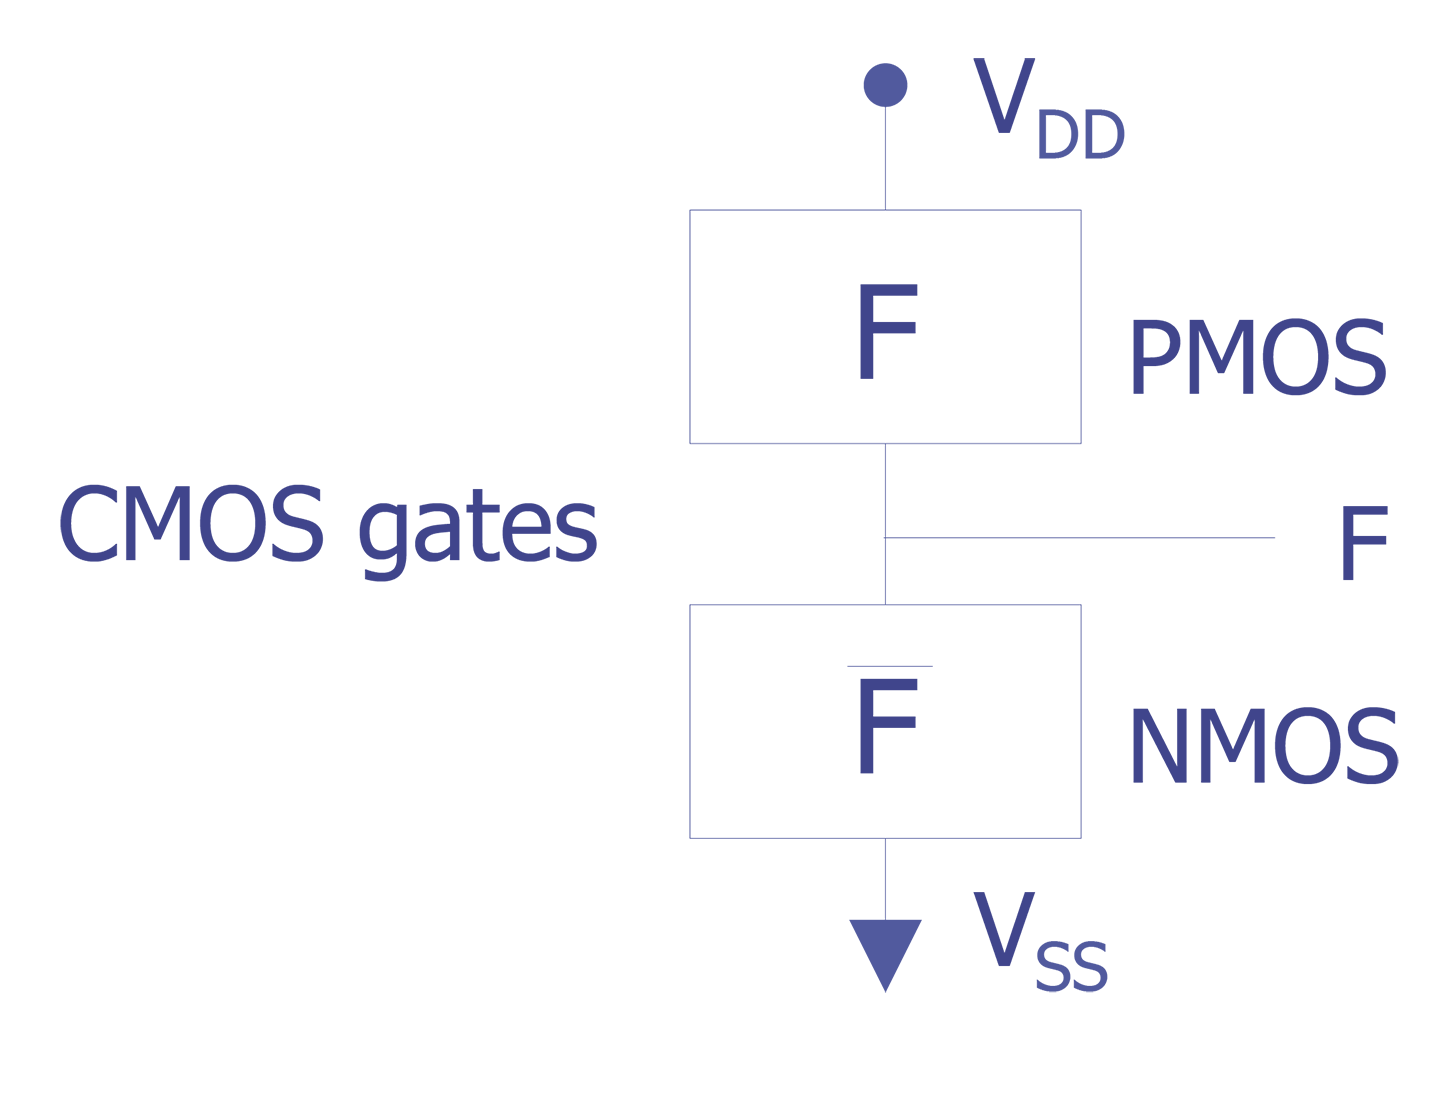 Basic concept showing the PMOS and NMOS networks in a complex CMOS logic gate.